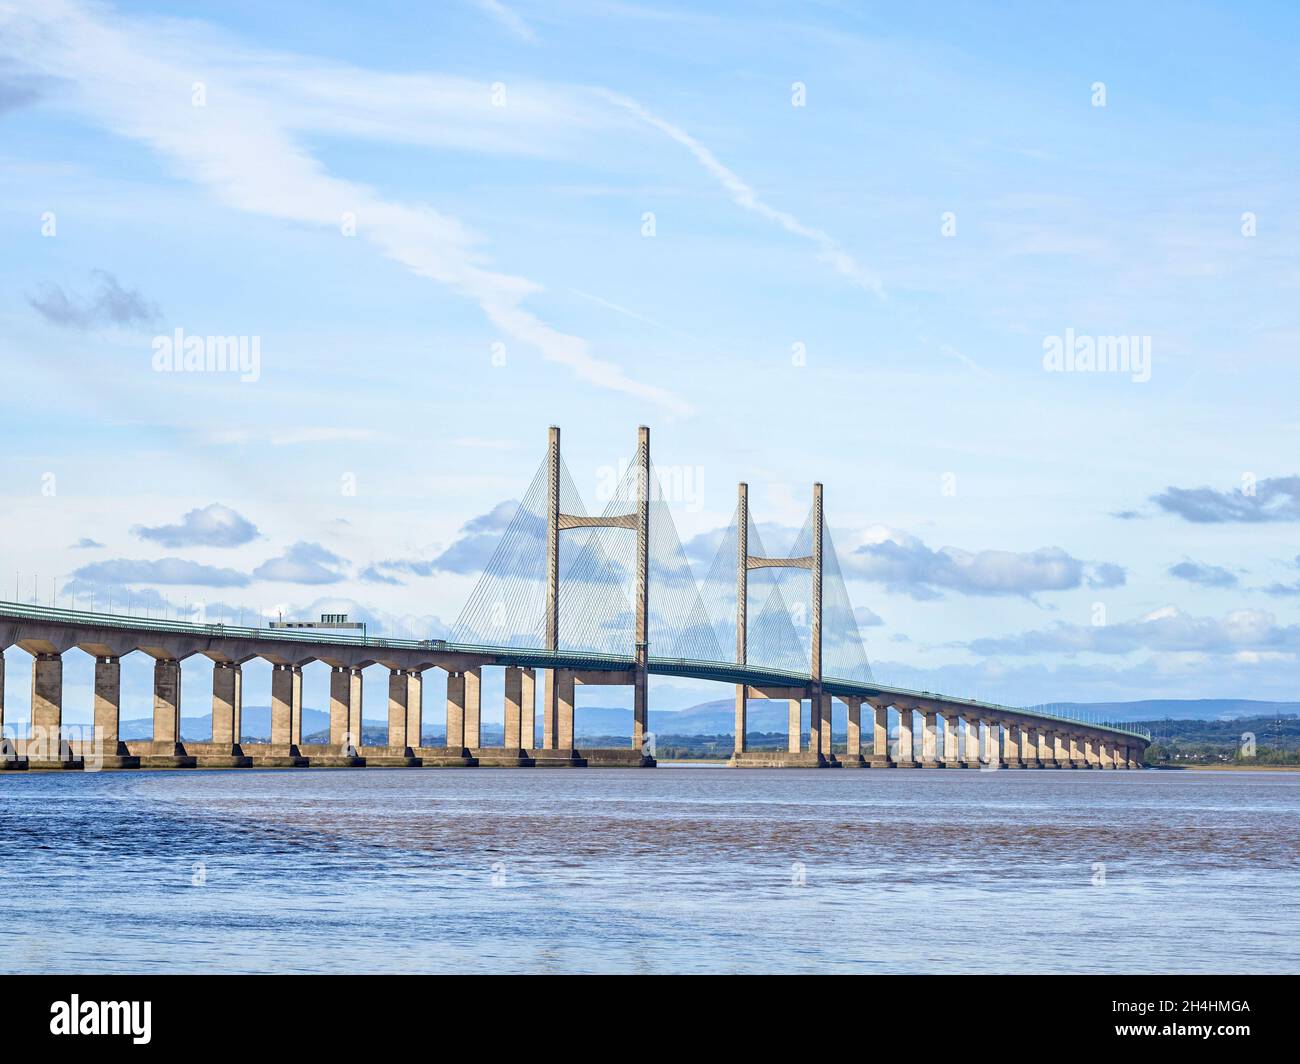 The Severn Bridge or Second Severn Crossing the Prince of Wales Bridge Pont Tywysog Cymru carrying the M4 motorway between England and Wales Stock Photo